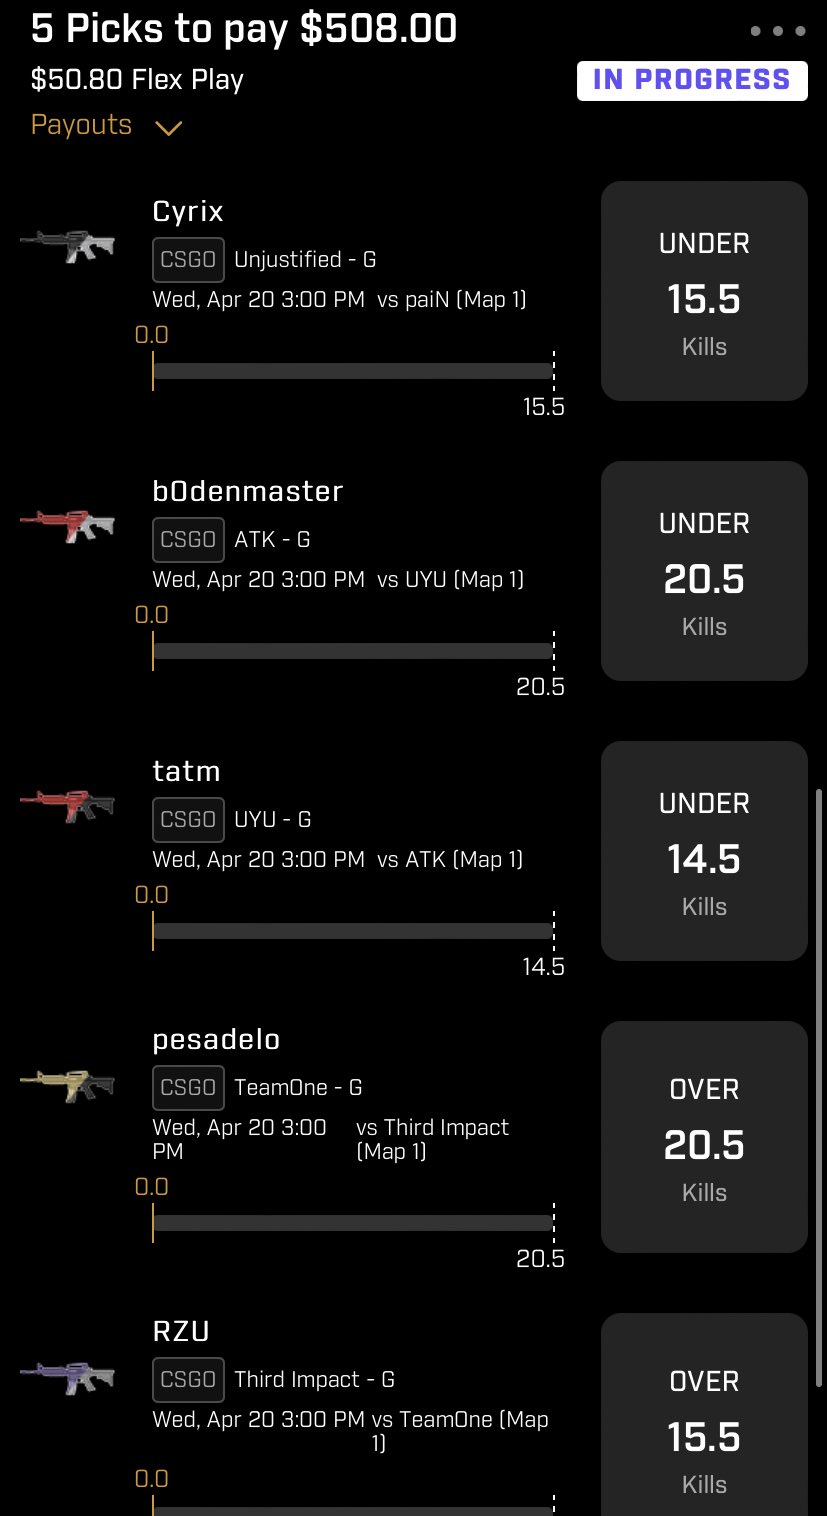 The Daily Fantasy Hitman On Twitter A Couple Of Late Csgo Plays For 3pm Pst On Prize Picks